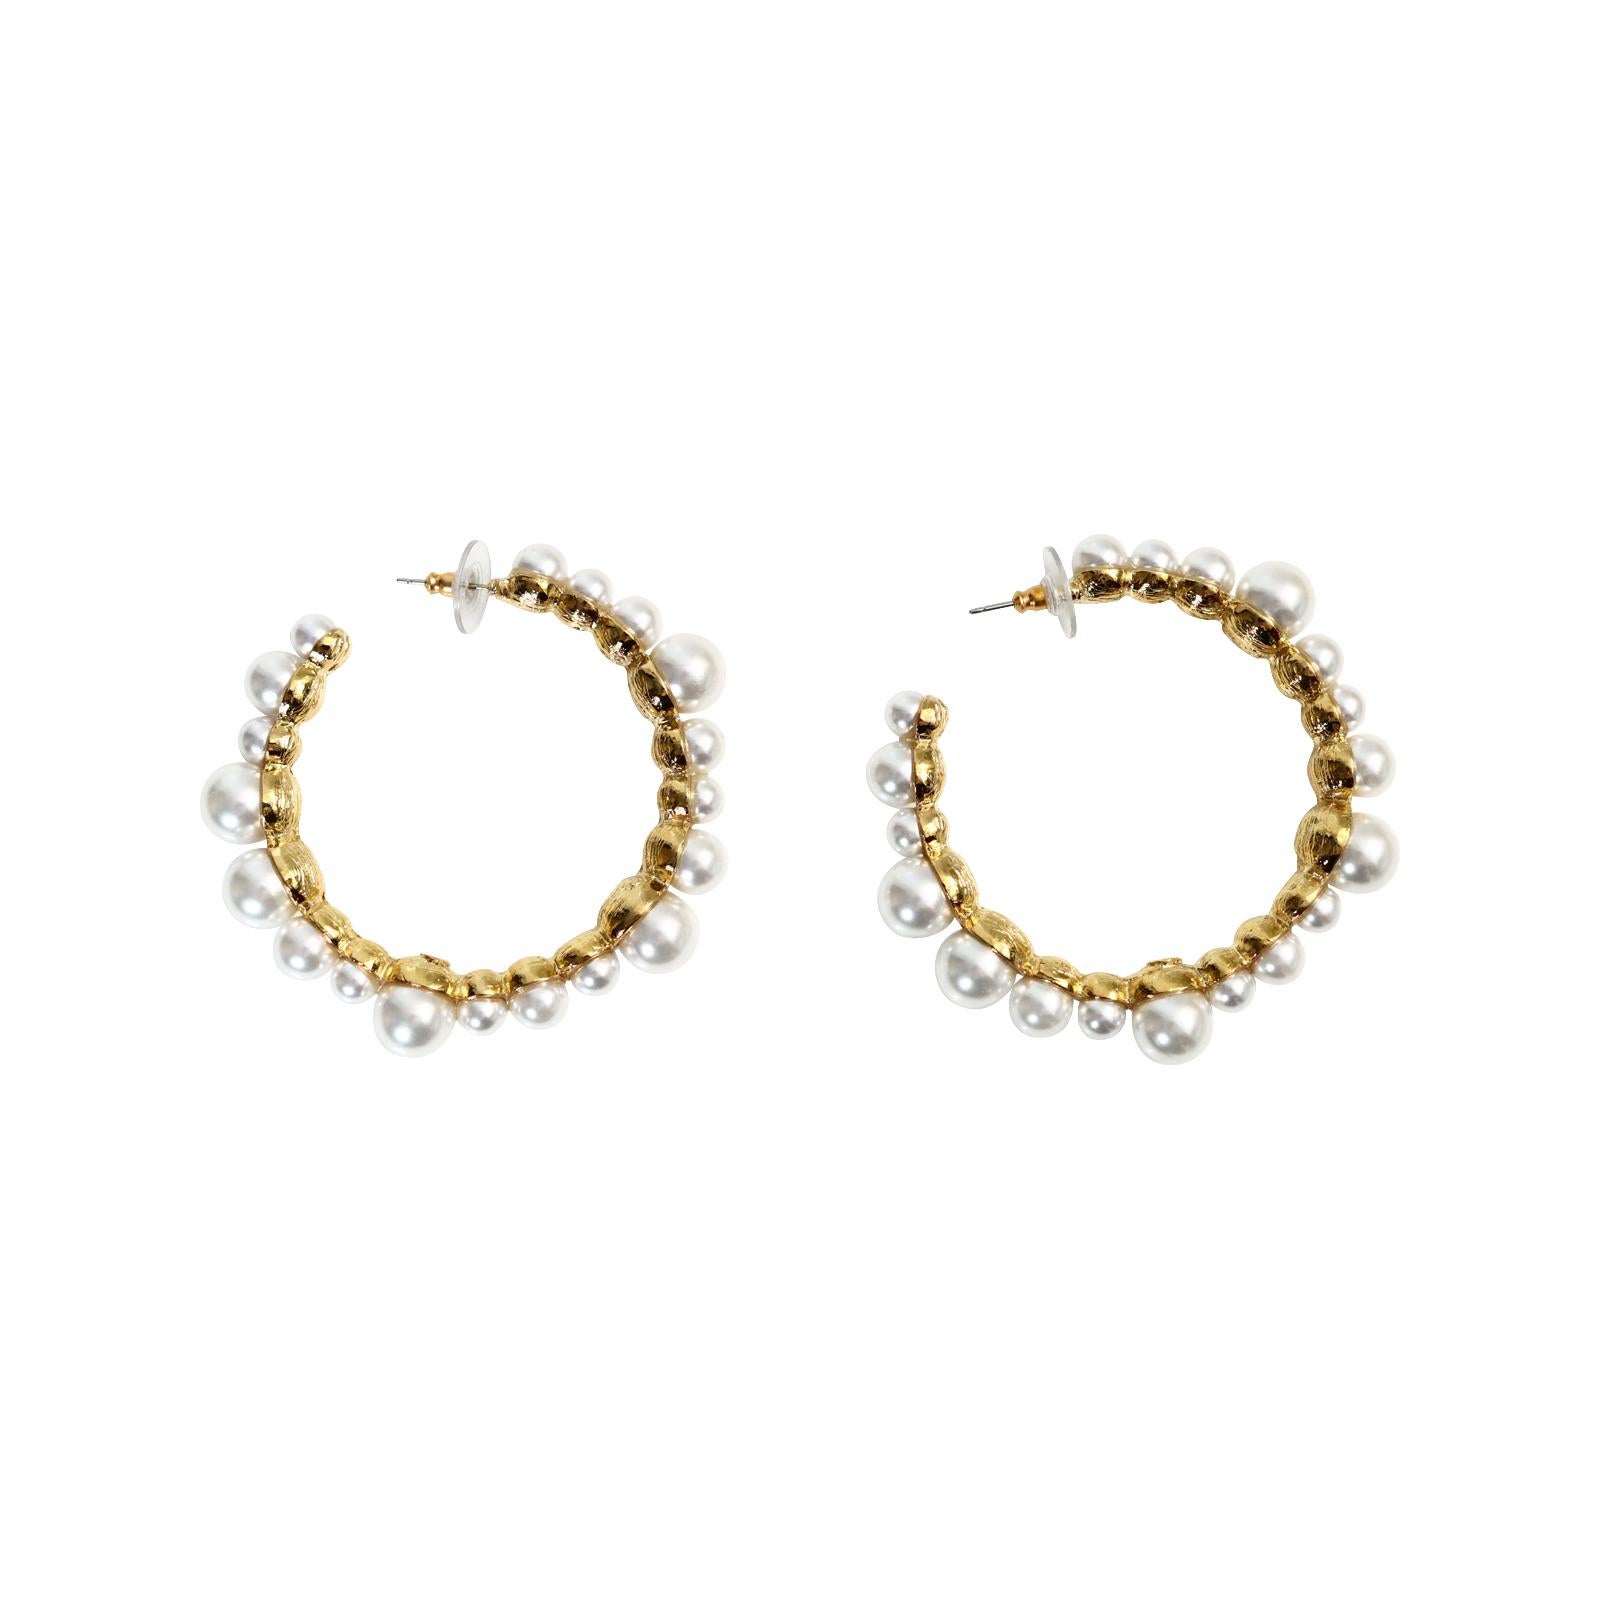 Collectible KJL Gold Hoops with Faux Pearls Circa 2000s. These have quite the look.  Large front facing hoops with Faux pearls in various shapes.  The larger pearls stick forward giving a very chic look.  Perfect for many outfits.  Pierced.

These